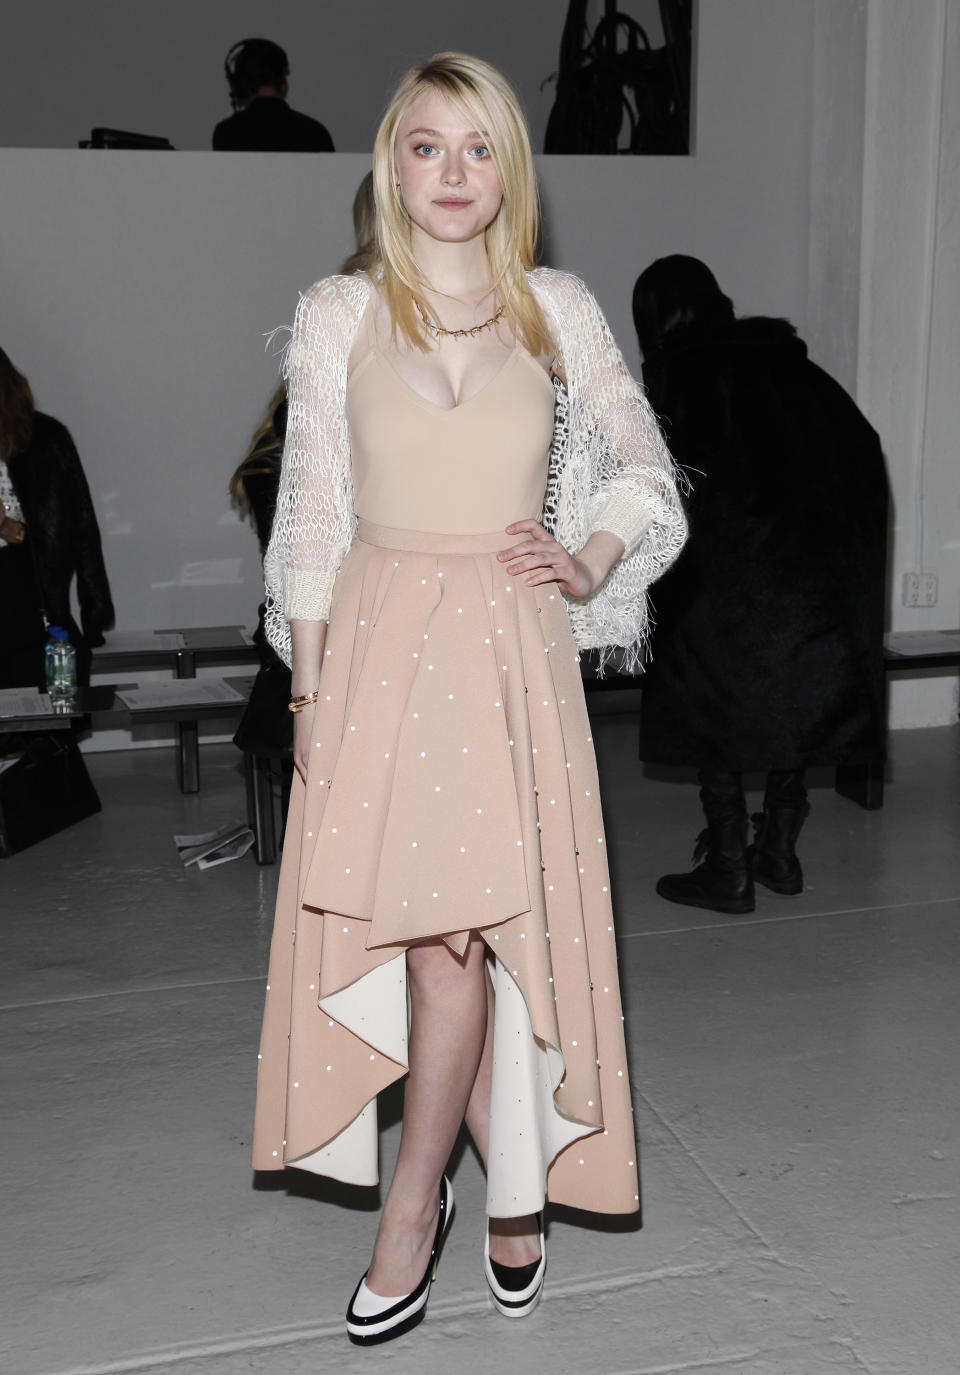 Actress Dakota Fanning attends the Rodarte 2014 Fall/Winter Collection during Mercedes Benz Fashion Week on Tuesday, Feb. 11, 2014, in New York. (Photo by Amy Sussman/Invision/AP)